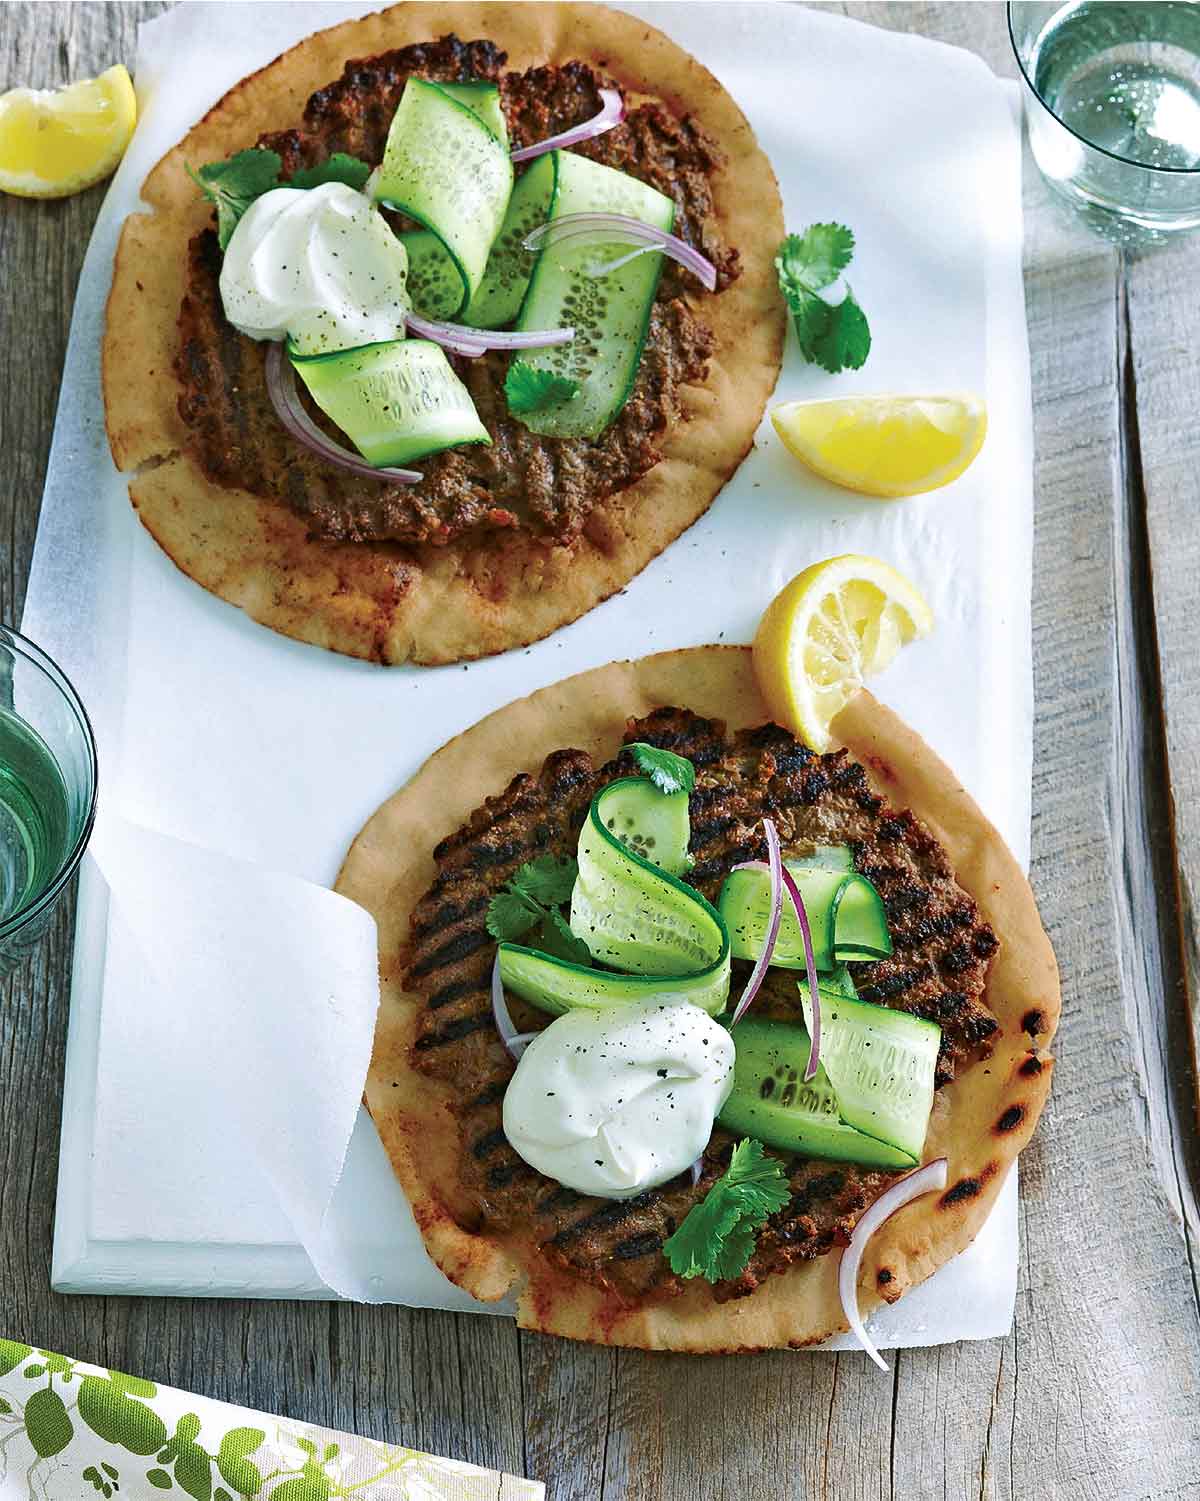 Two servings of spiced beef on whole wheat flatbread topped with cucumber ribbons and yogurt, with lemon wedges on the side.